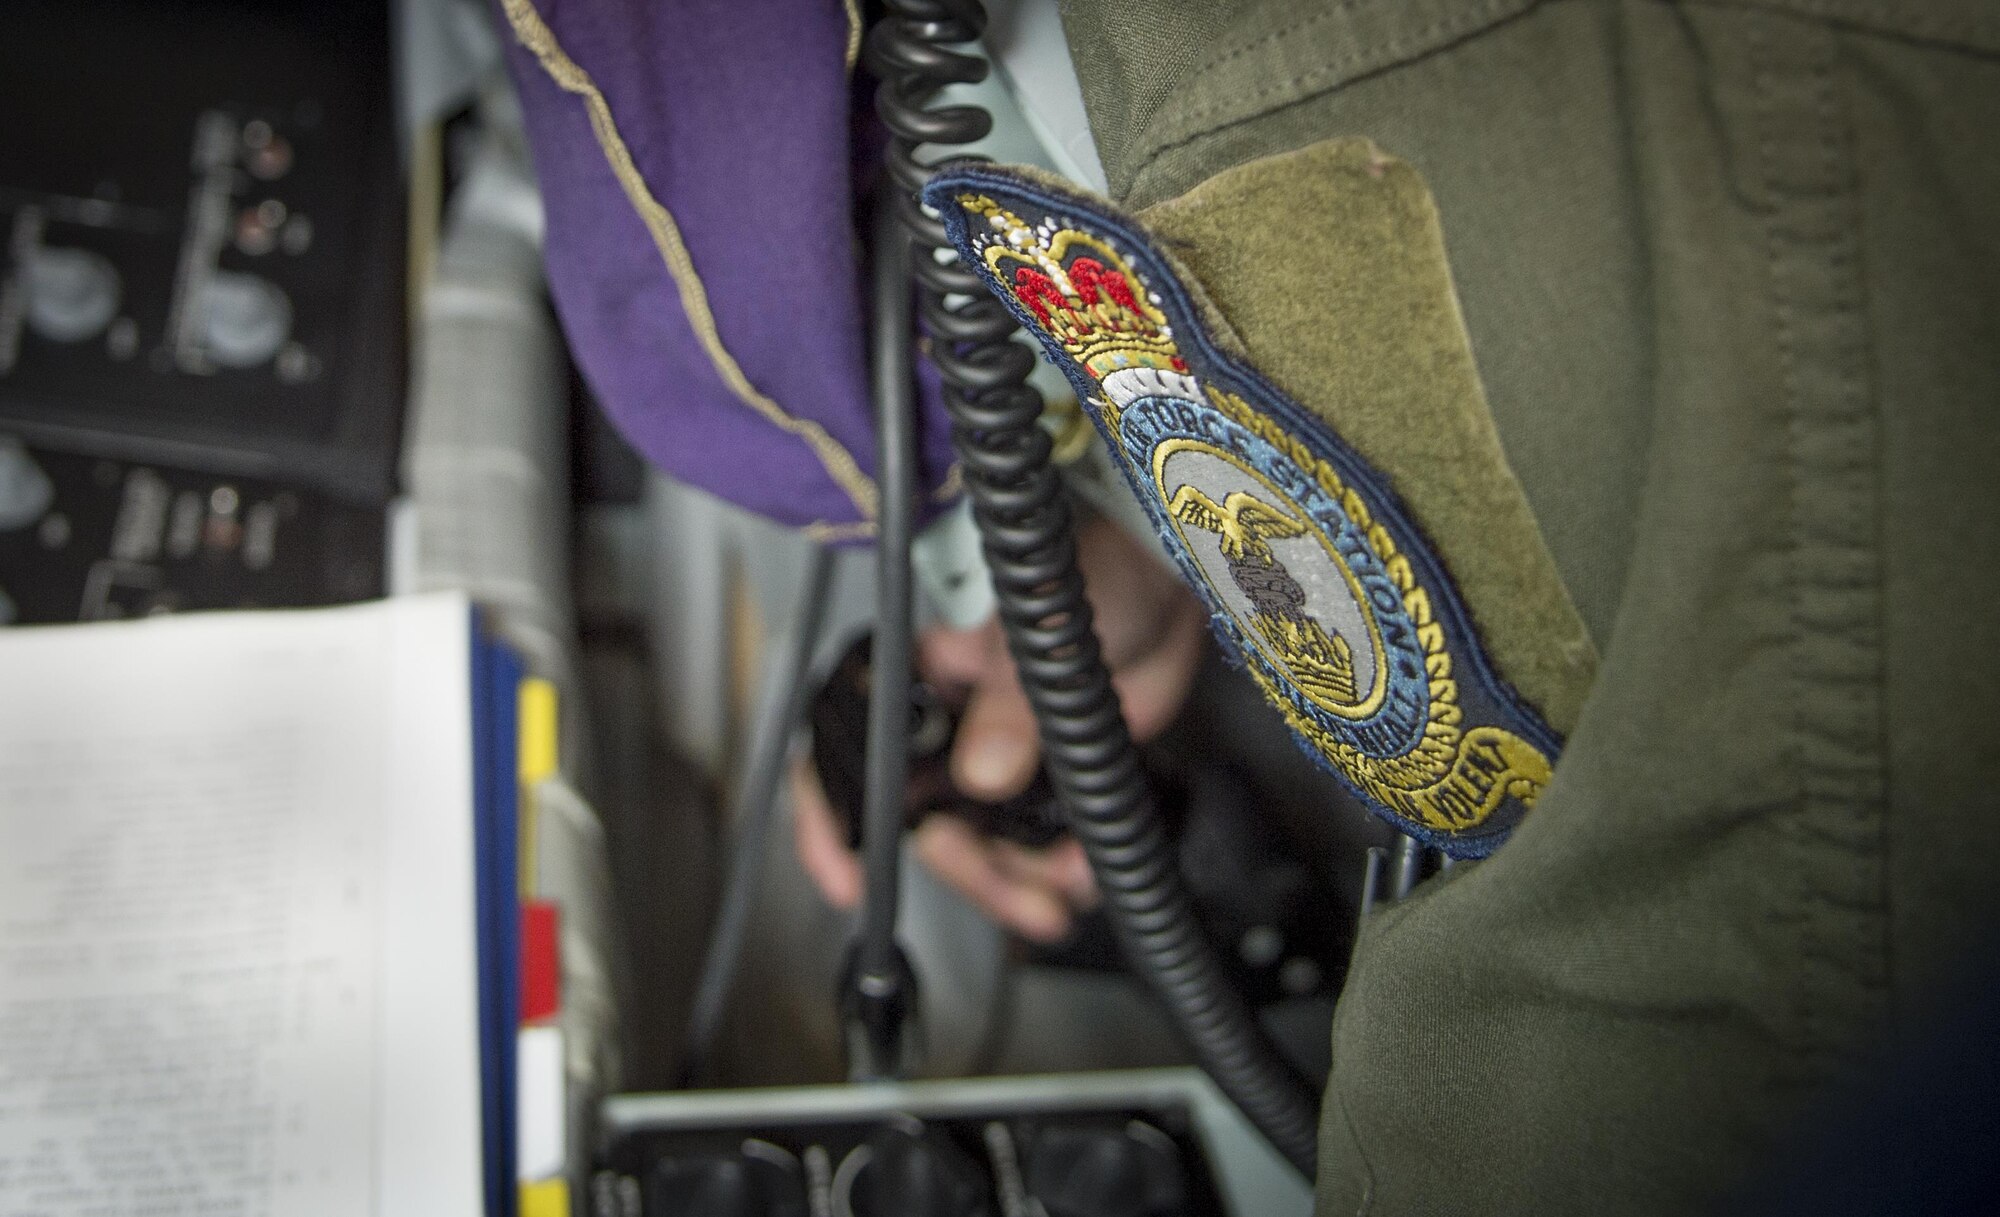 A Royal Air Force Mildenhall patch is attached to the flight suit of U.S. Air Force Tech. Sgt. Augie Marshall, wing scheduler assigned to the 100th Operations Support Squadron, as he operates the Boom Operator Weapons Systems Trainer (BOWST) Nov. 8, 2017, at MacDill Air Force Base, Fla. The BOWST creates a platform to instruct Airmen assigned to the MacDill BOWST to Airmen from around the world. (U.S. Air Force photo by Senior Airman Mariette Adams)